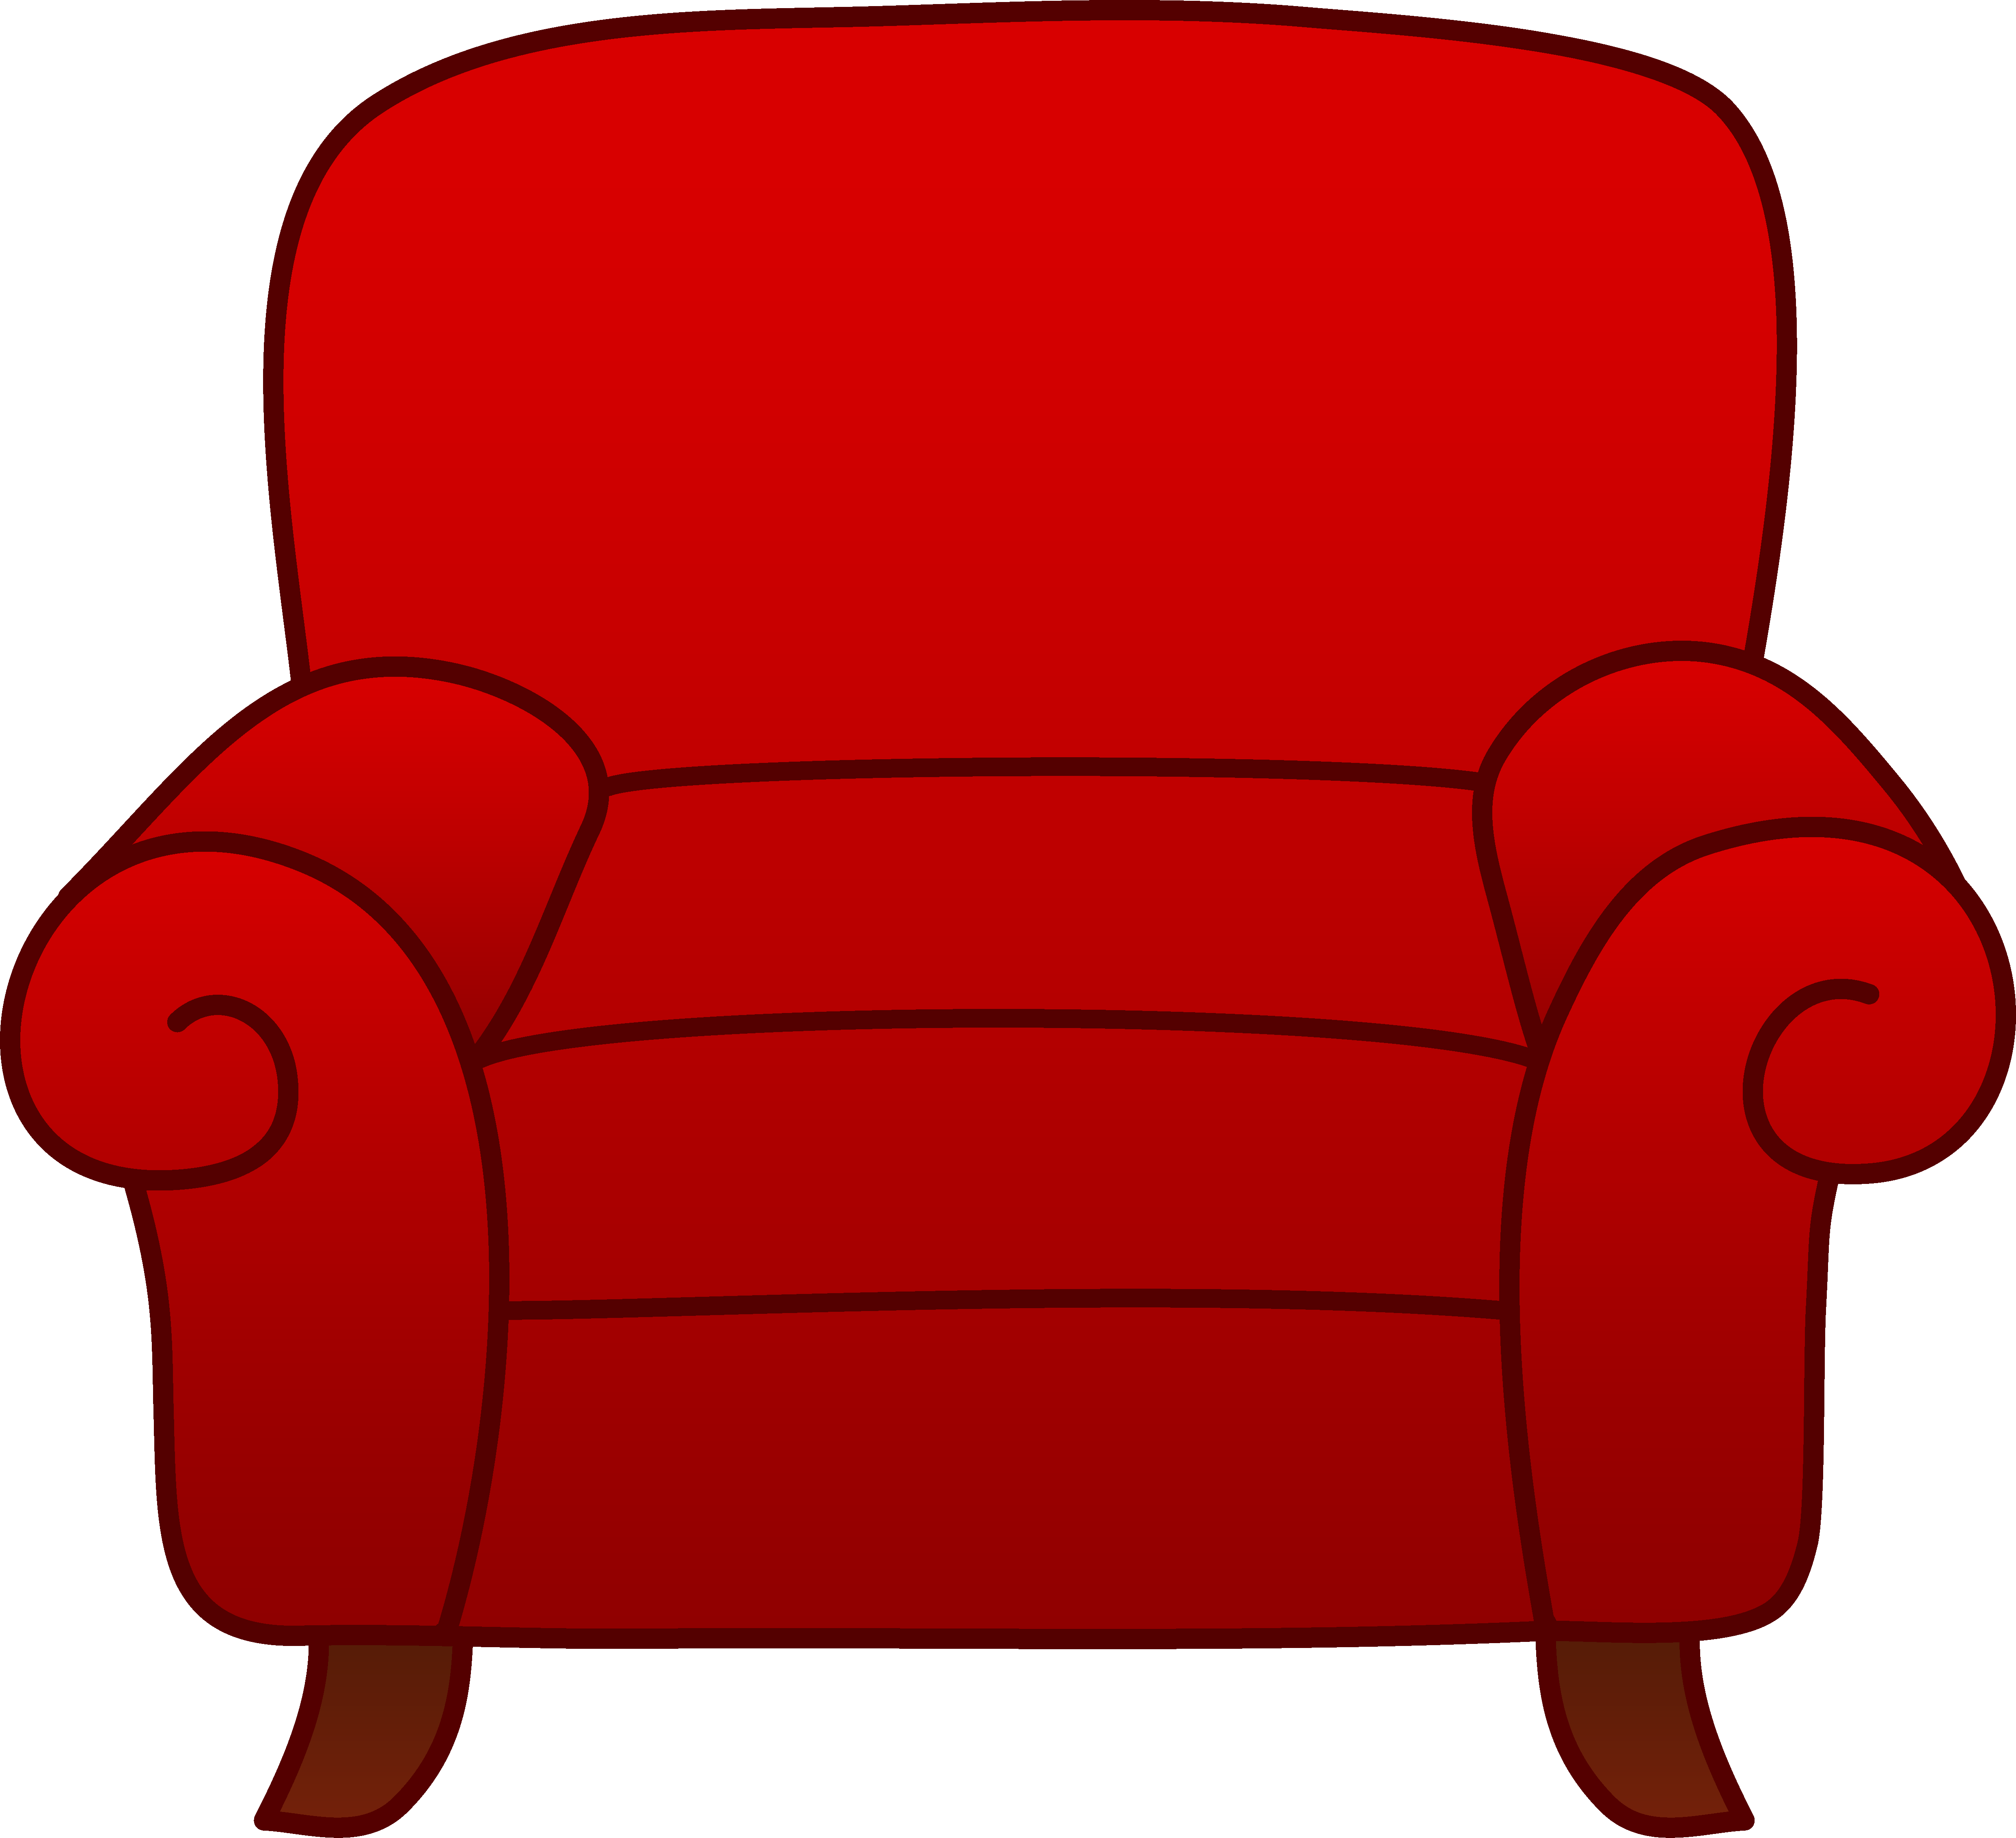 red armchair clipart - Clip Art Library